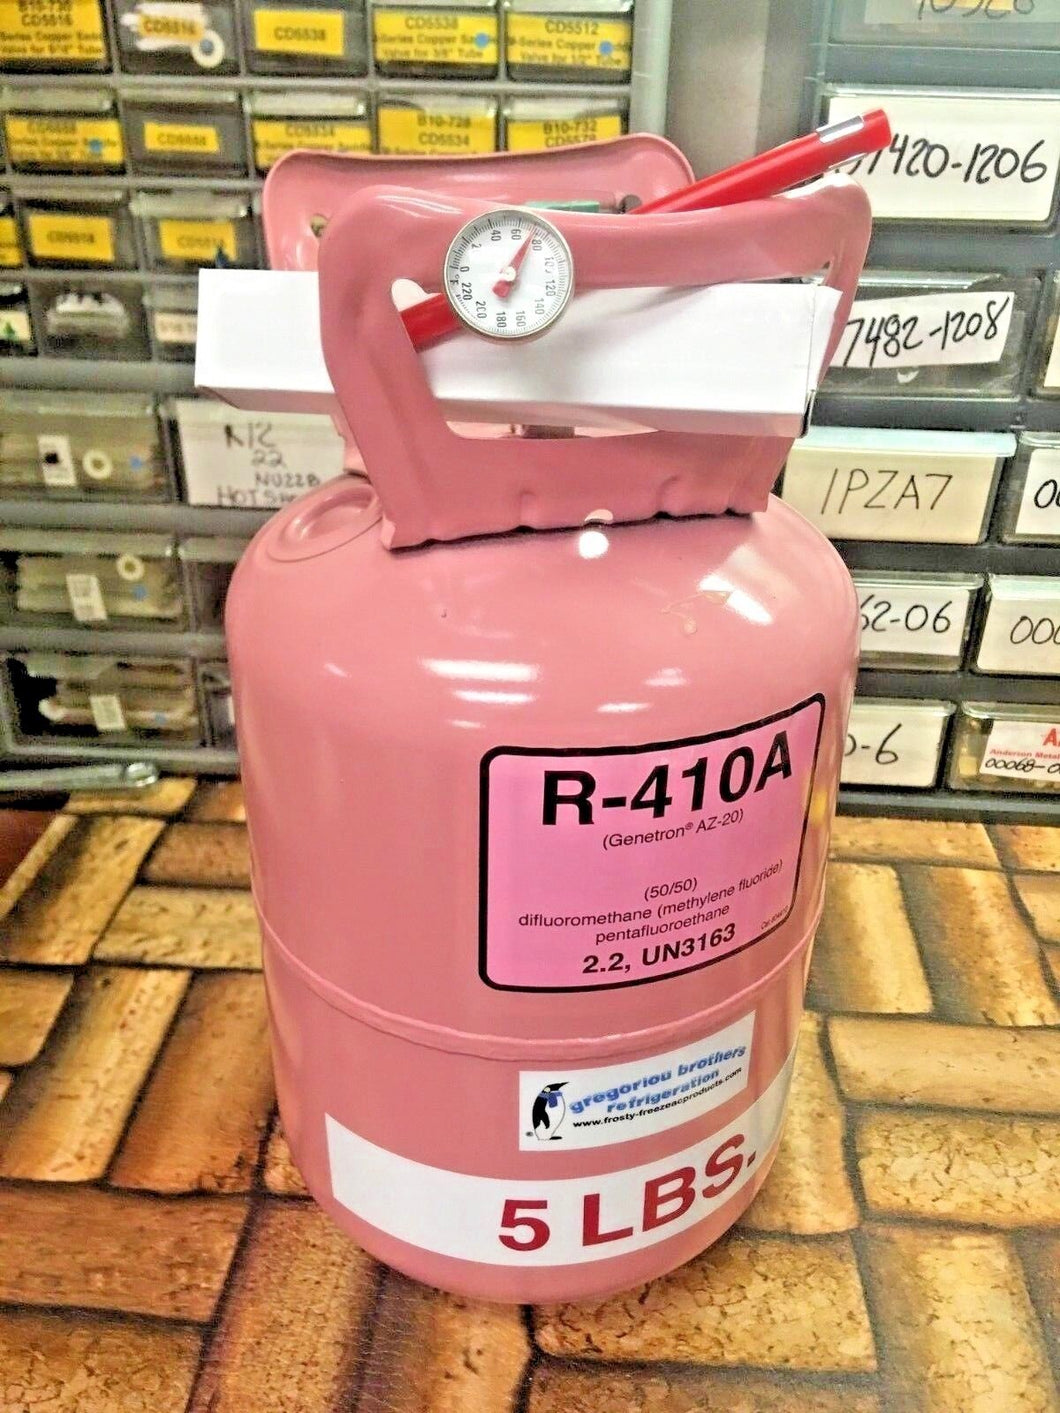 R410a, Refrigerant, 5 lb. Can, 410a, Best Value On eBay, Thermometer